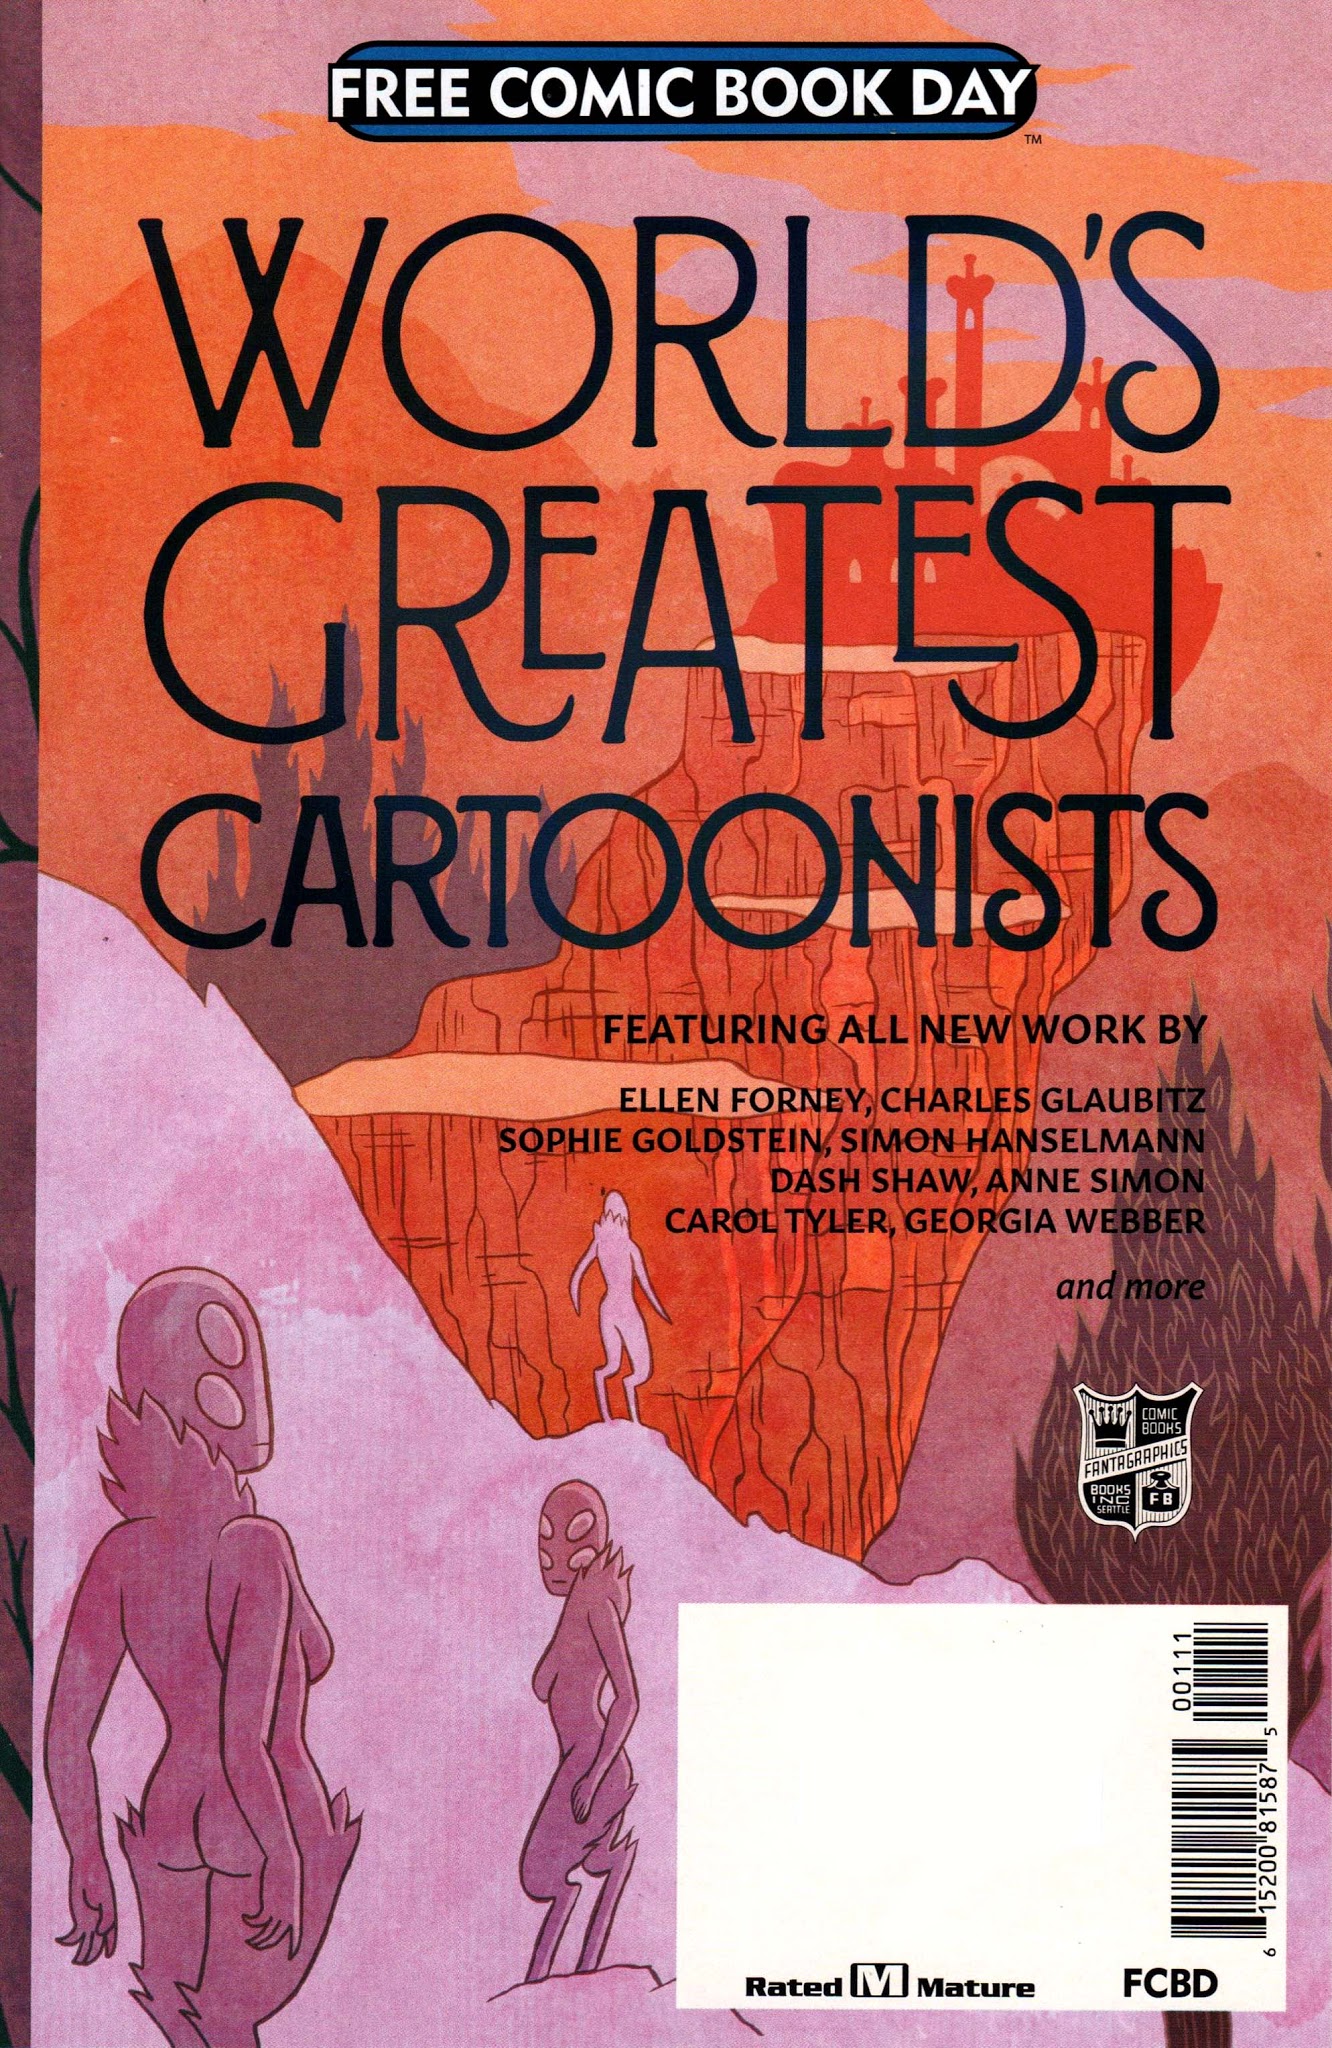 Read online Free Comic Book Day 2018 comic -  Issue # Worlds Greatest Cartoonists - 1